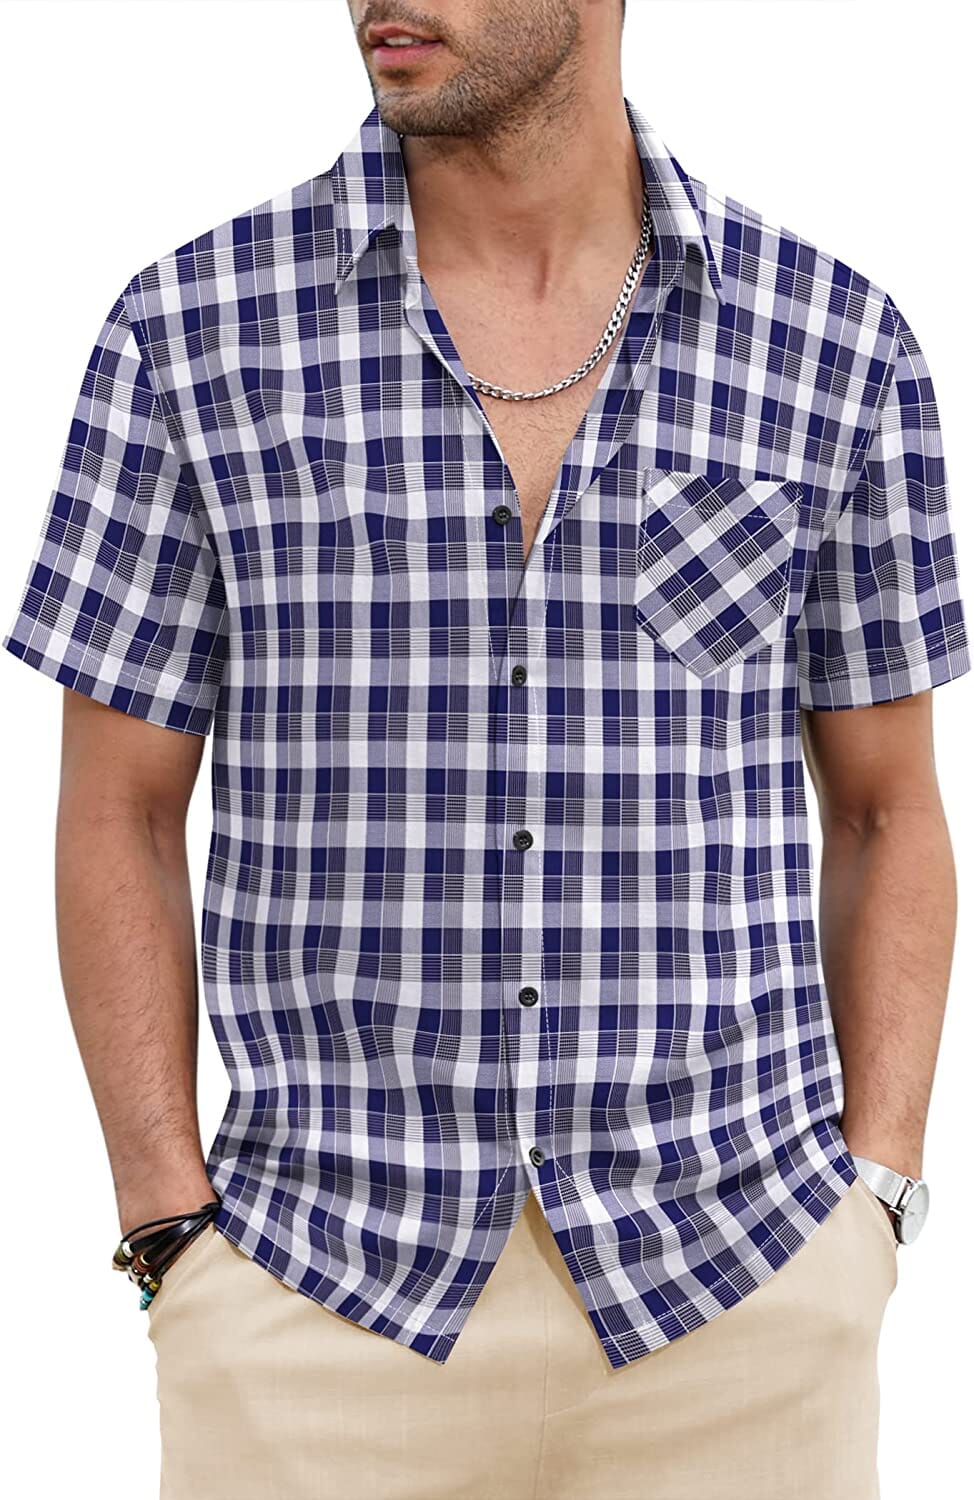 Classic Short Sleeve Plaid Cotton Shirts with Pocket (US Only) Shirts COOFANDY Store Navy Blue L 